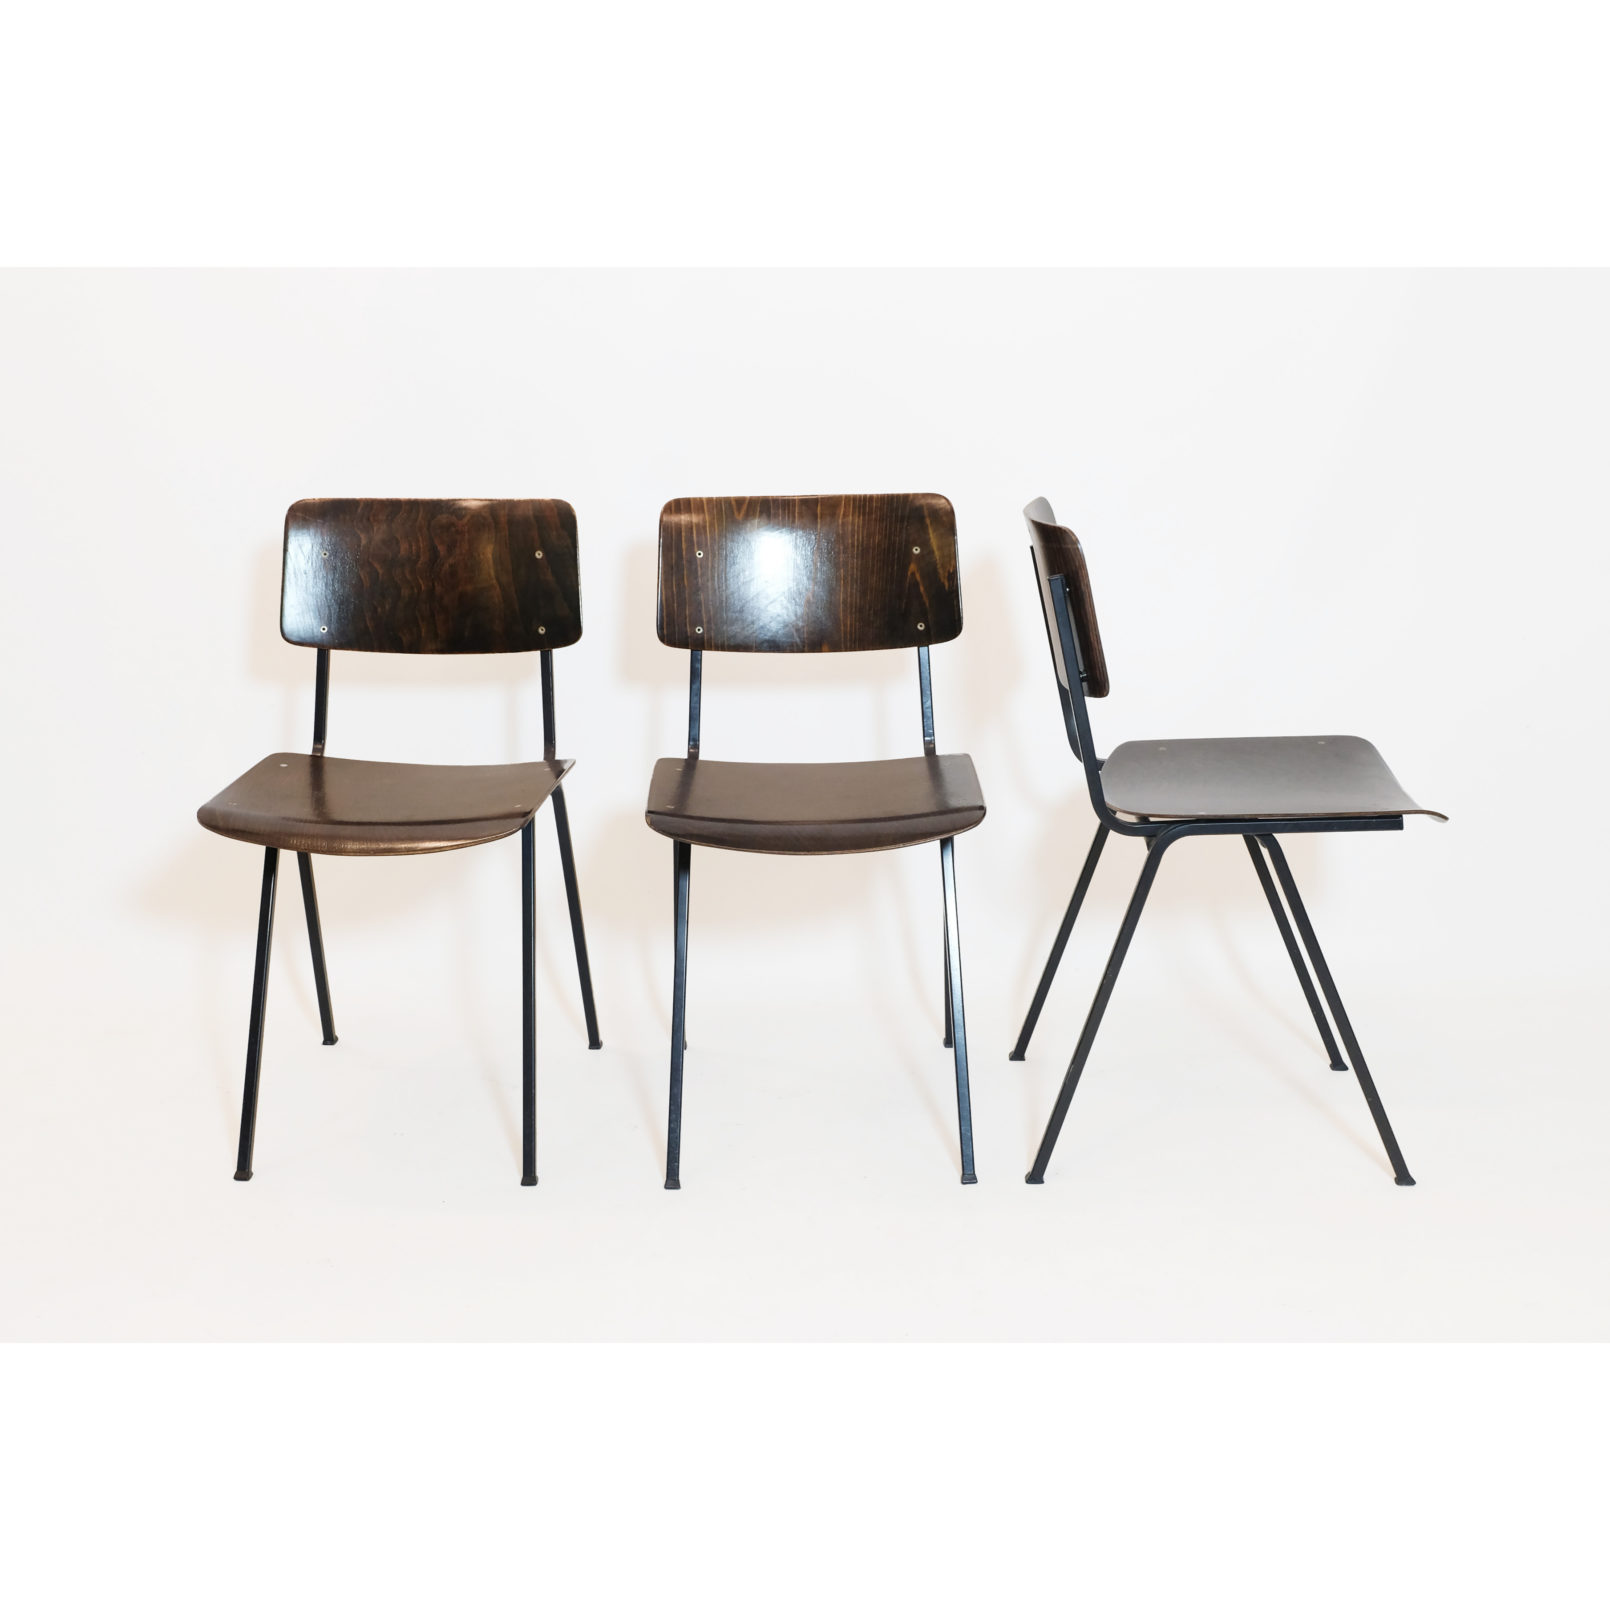 3 F6 chairs by Eromes, Nederlands, 1960s.